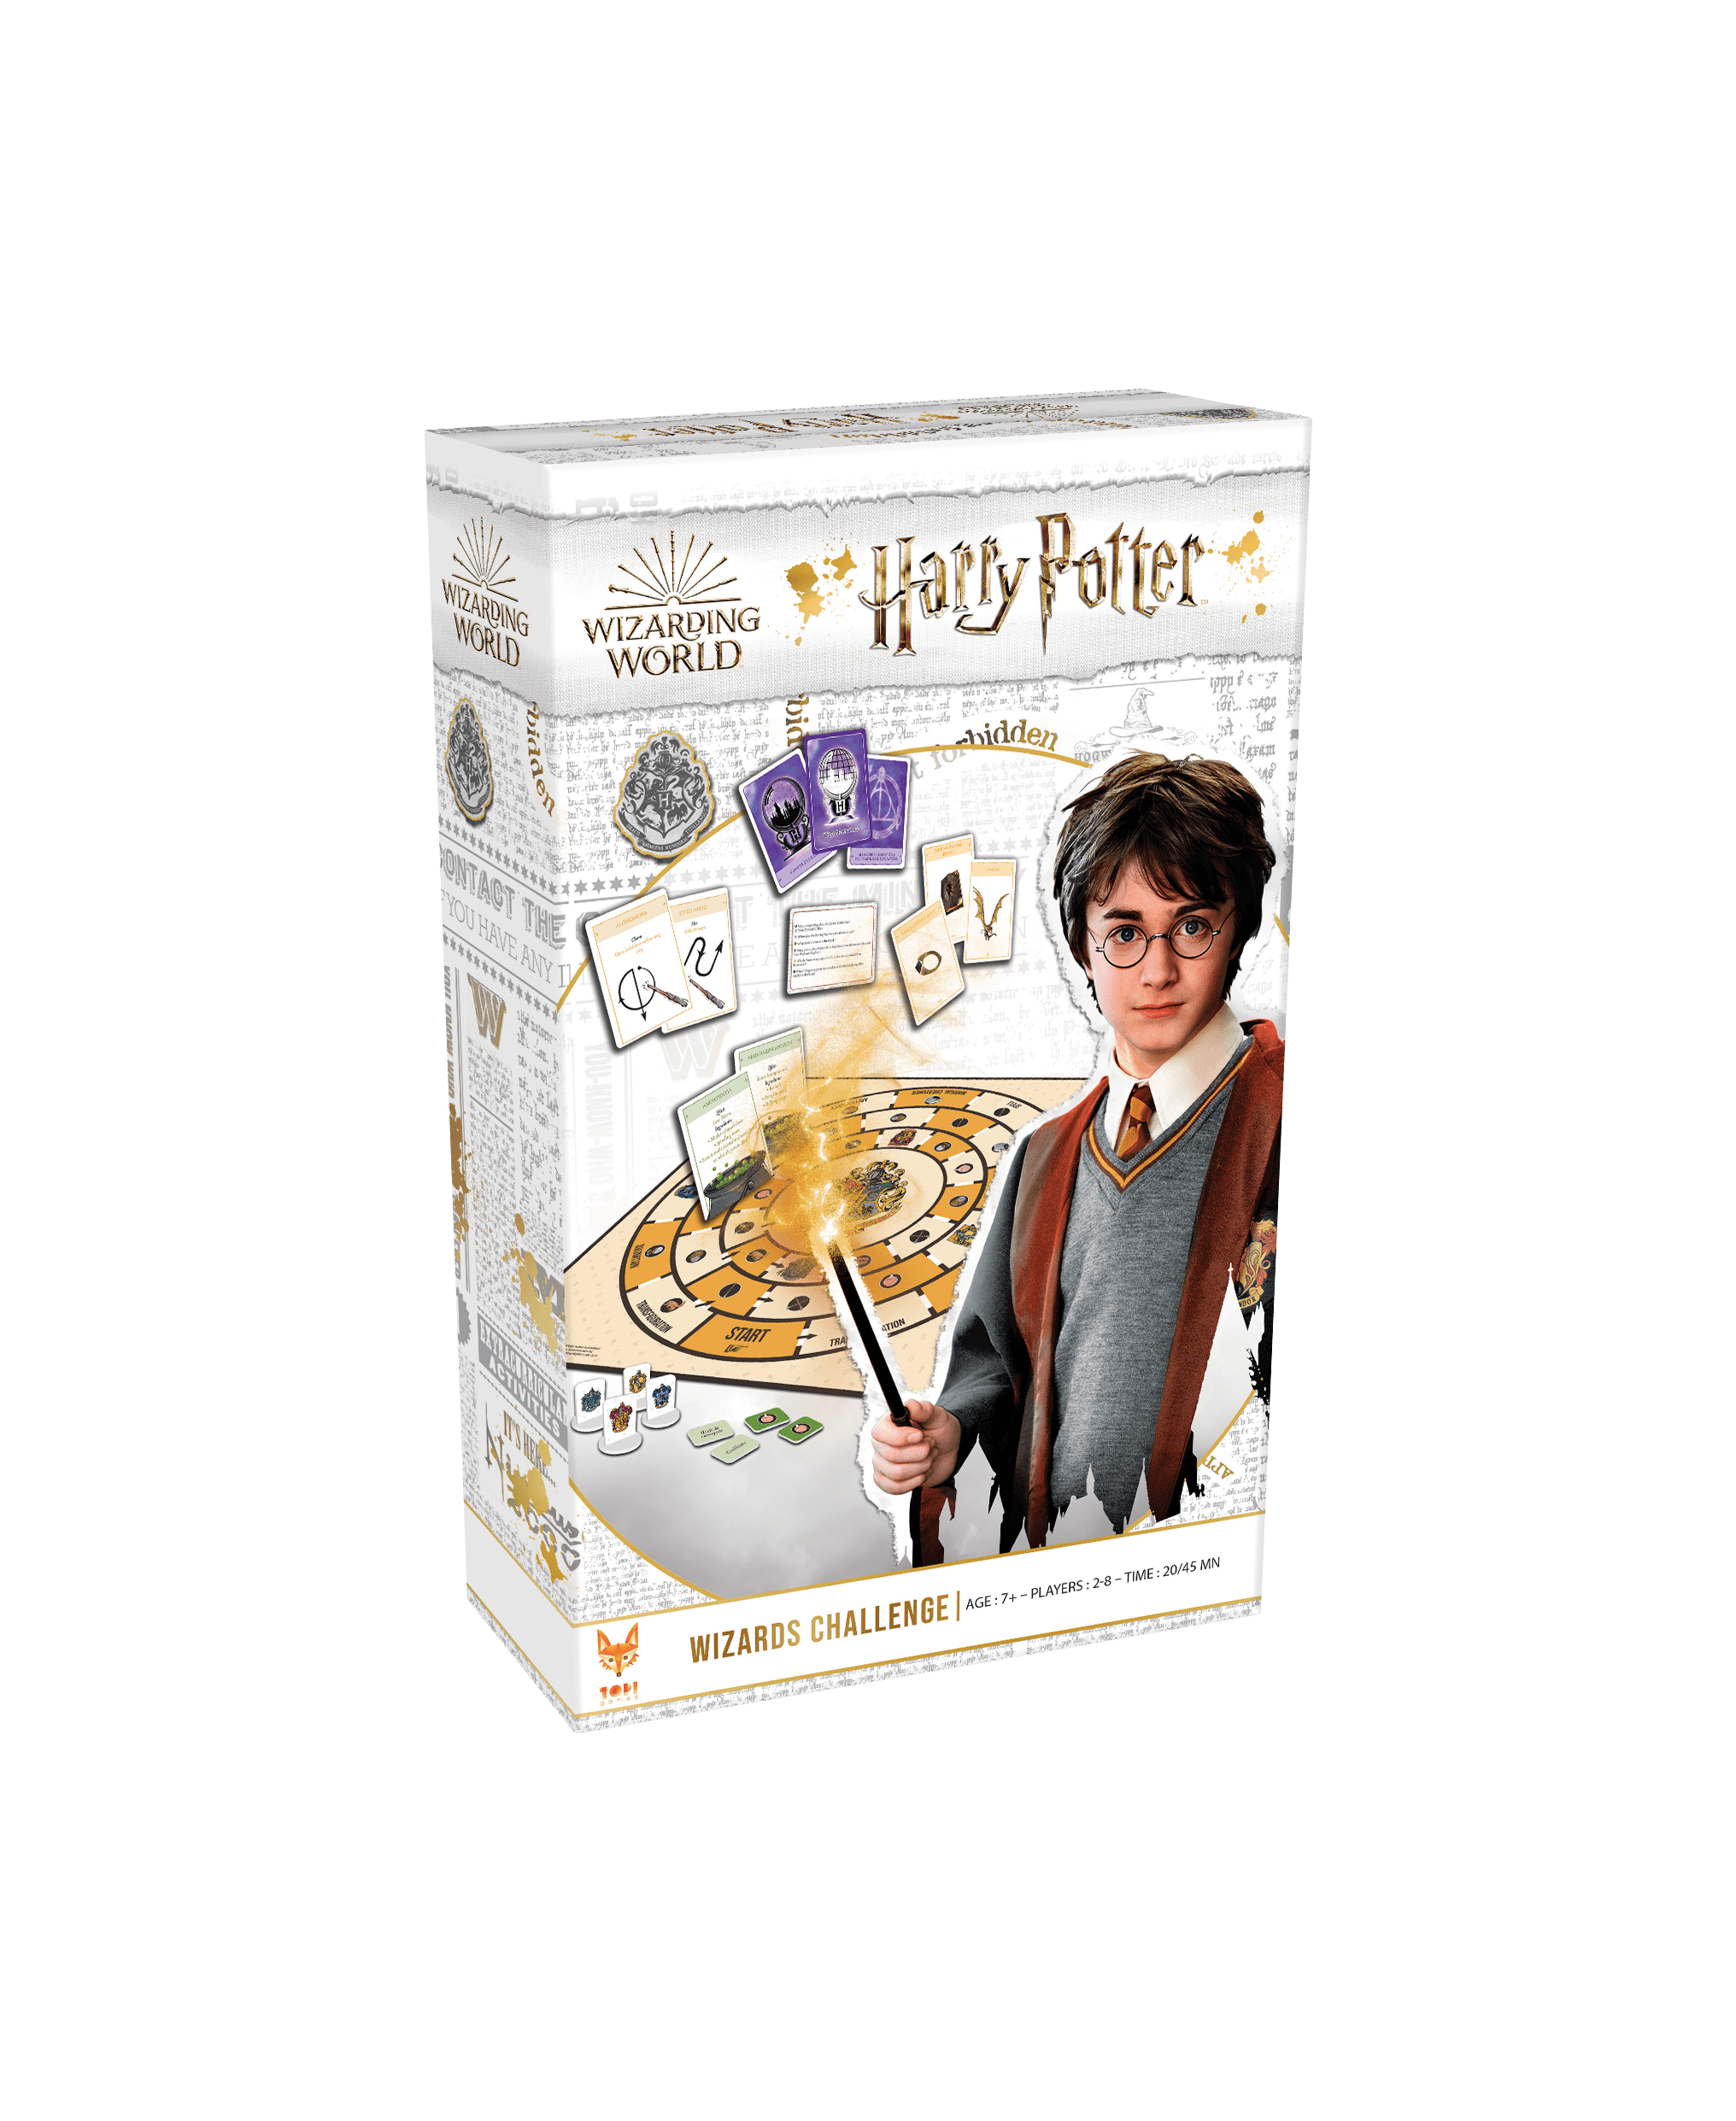 Harry Potter A Year at Hogwarts Board Game - Boutique Harry Potter